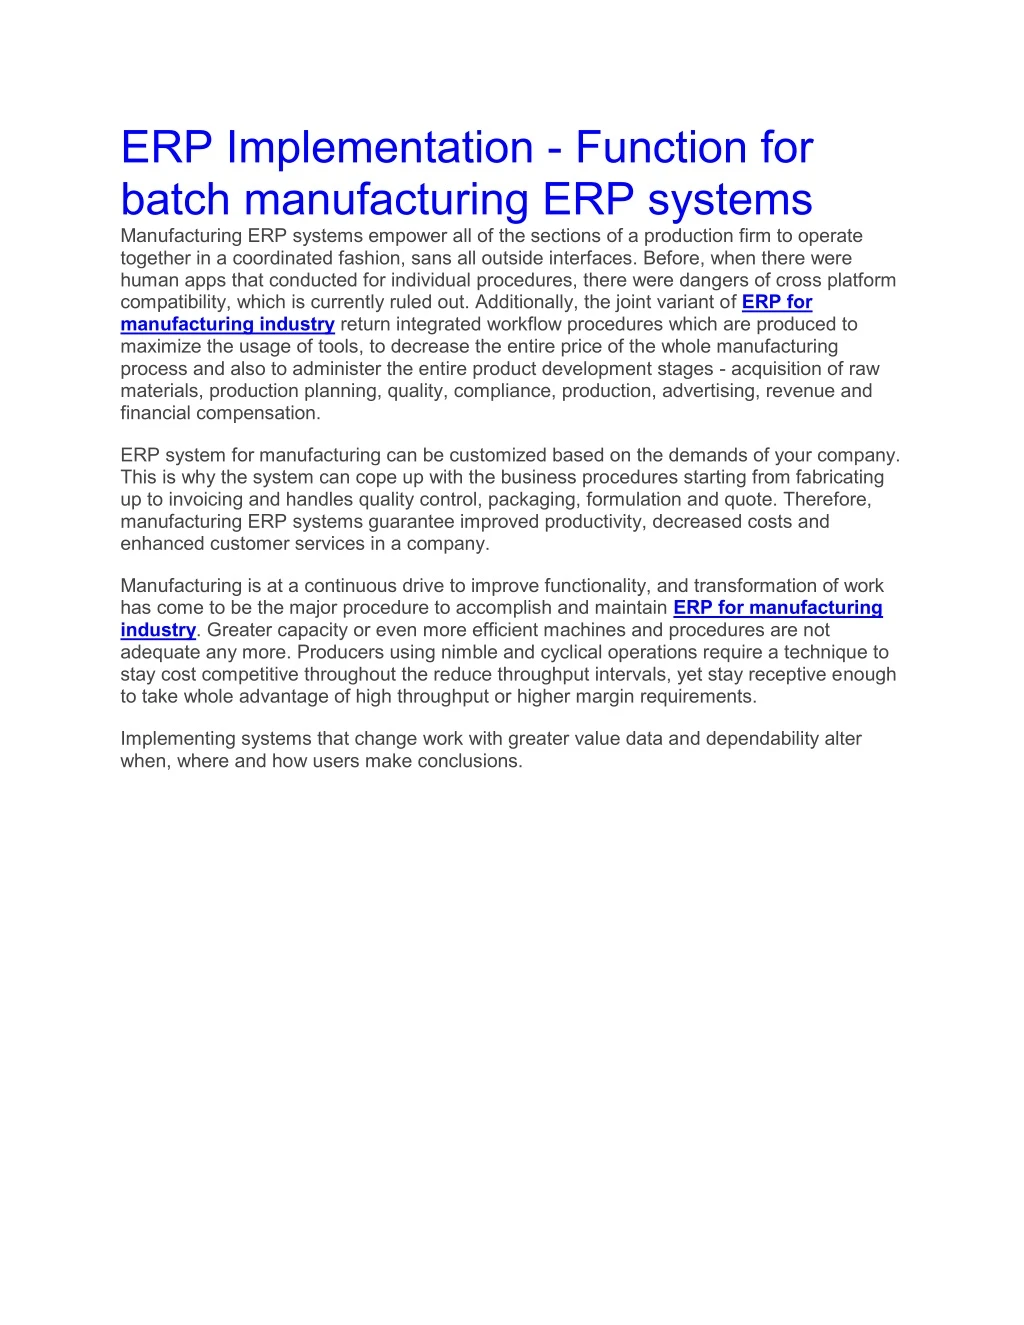 erp implementation function for batch